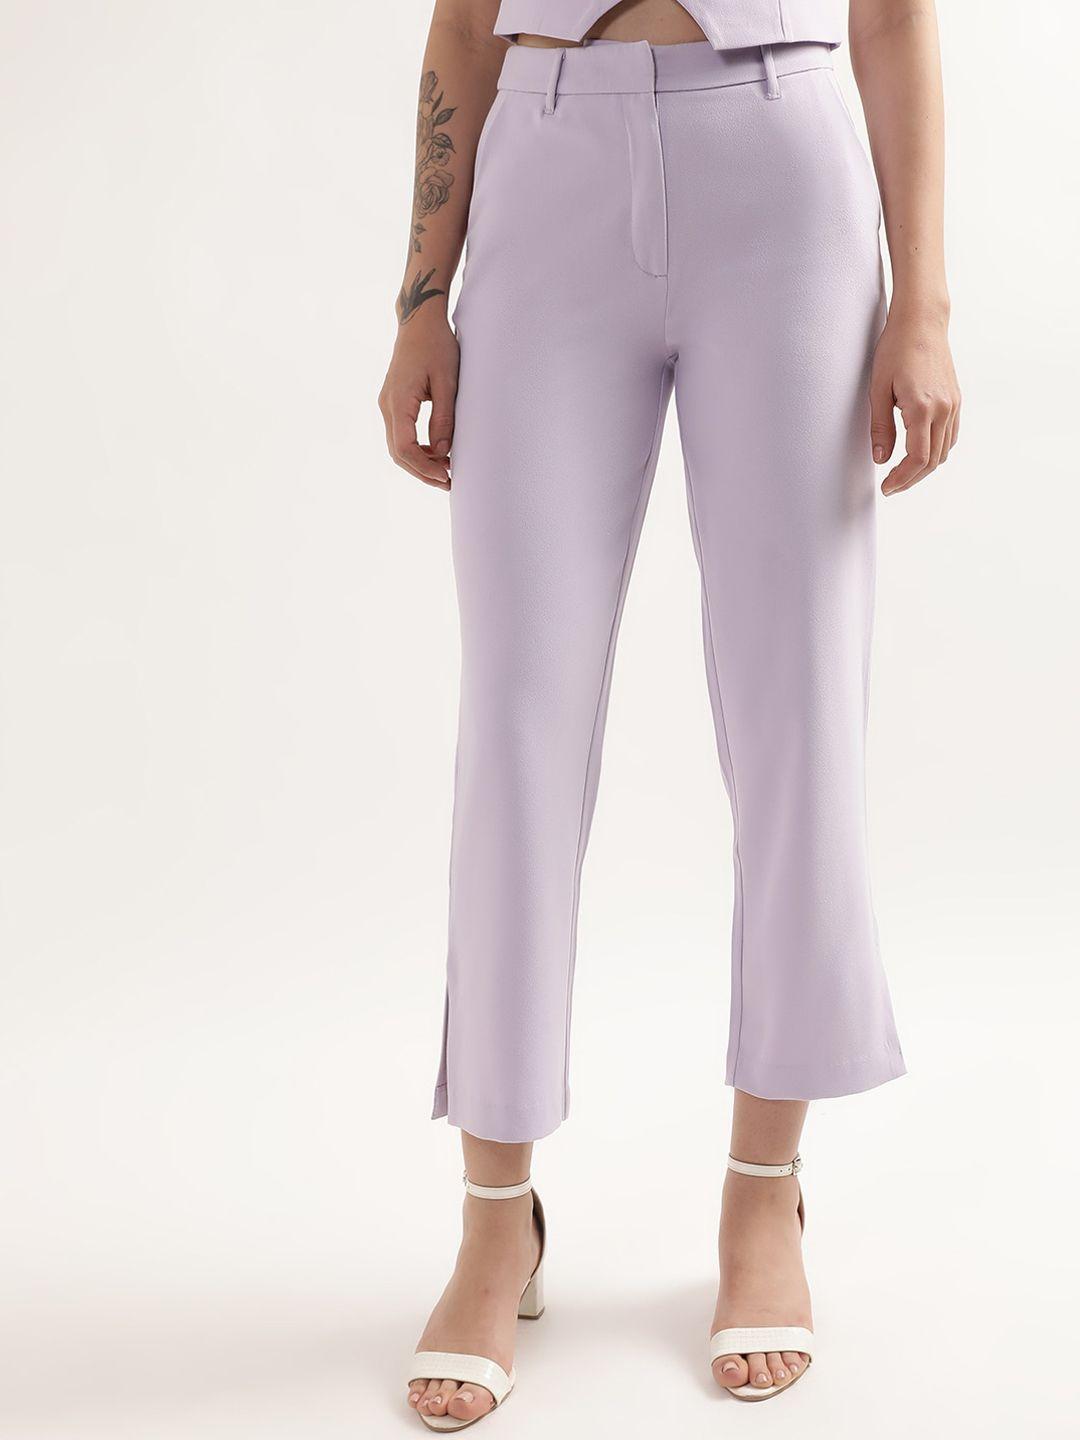 centrestage-women-high-rise-culottes-trousers